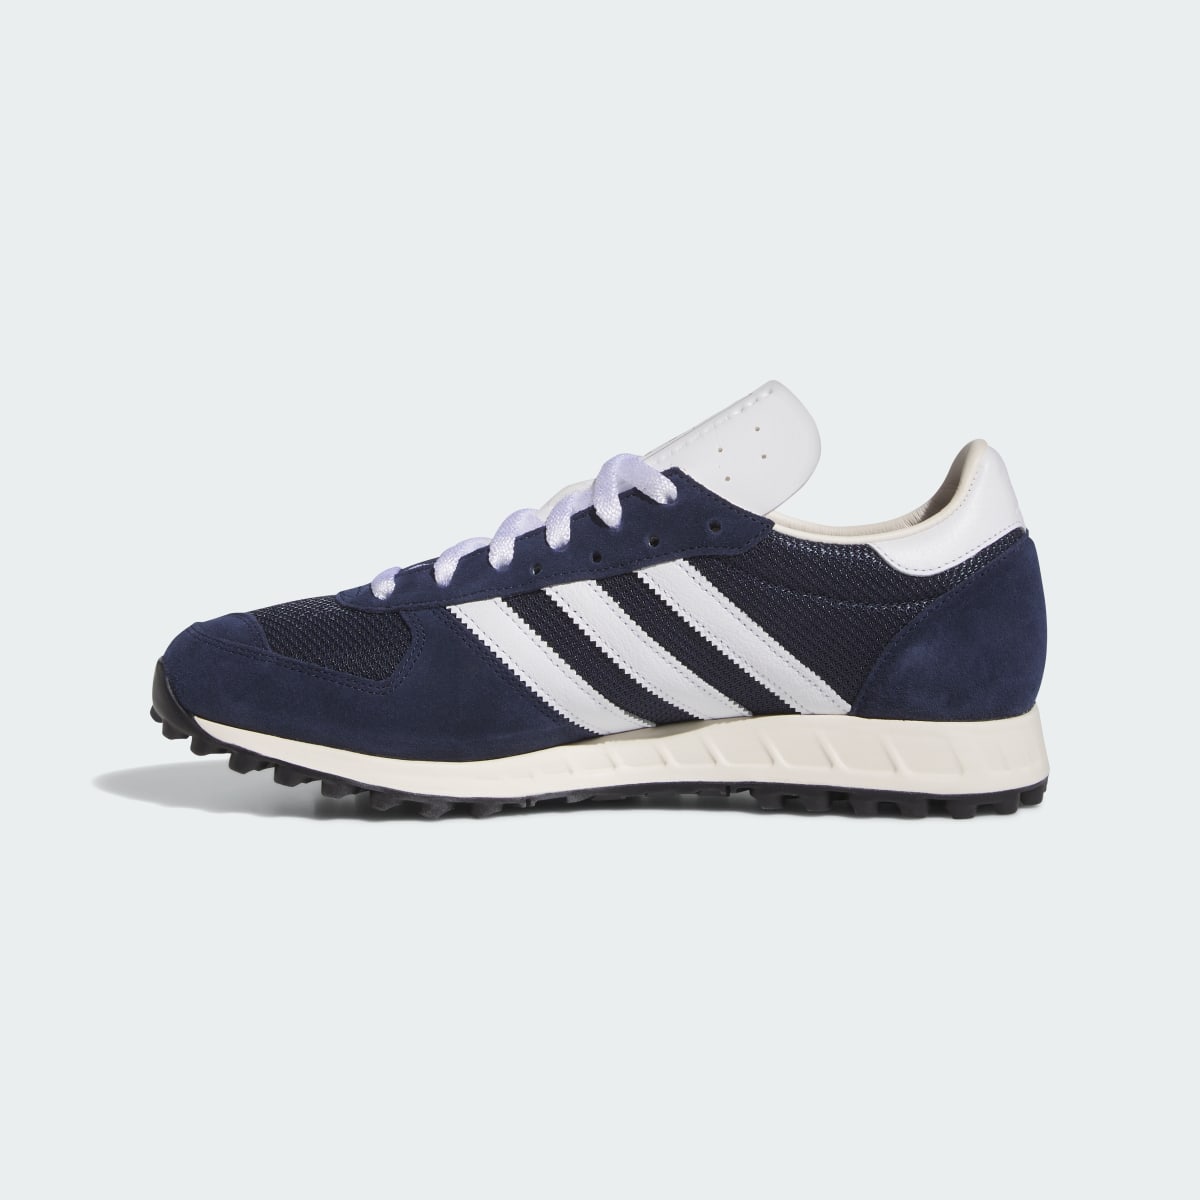 Adidas Pop Trading Co TRX Trainers. 8